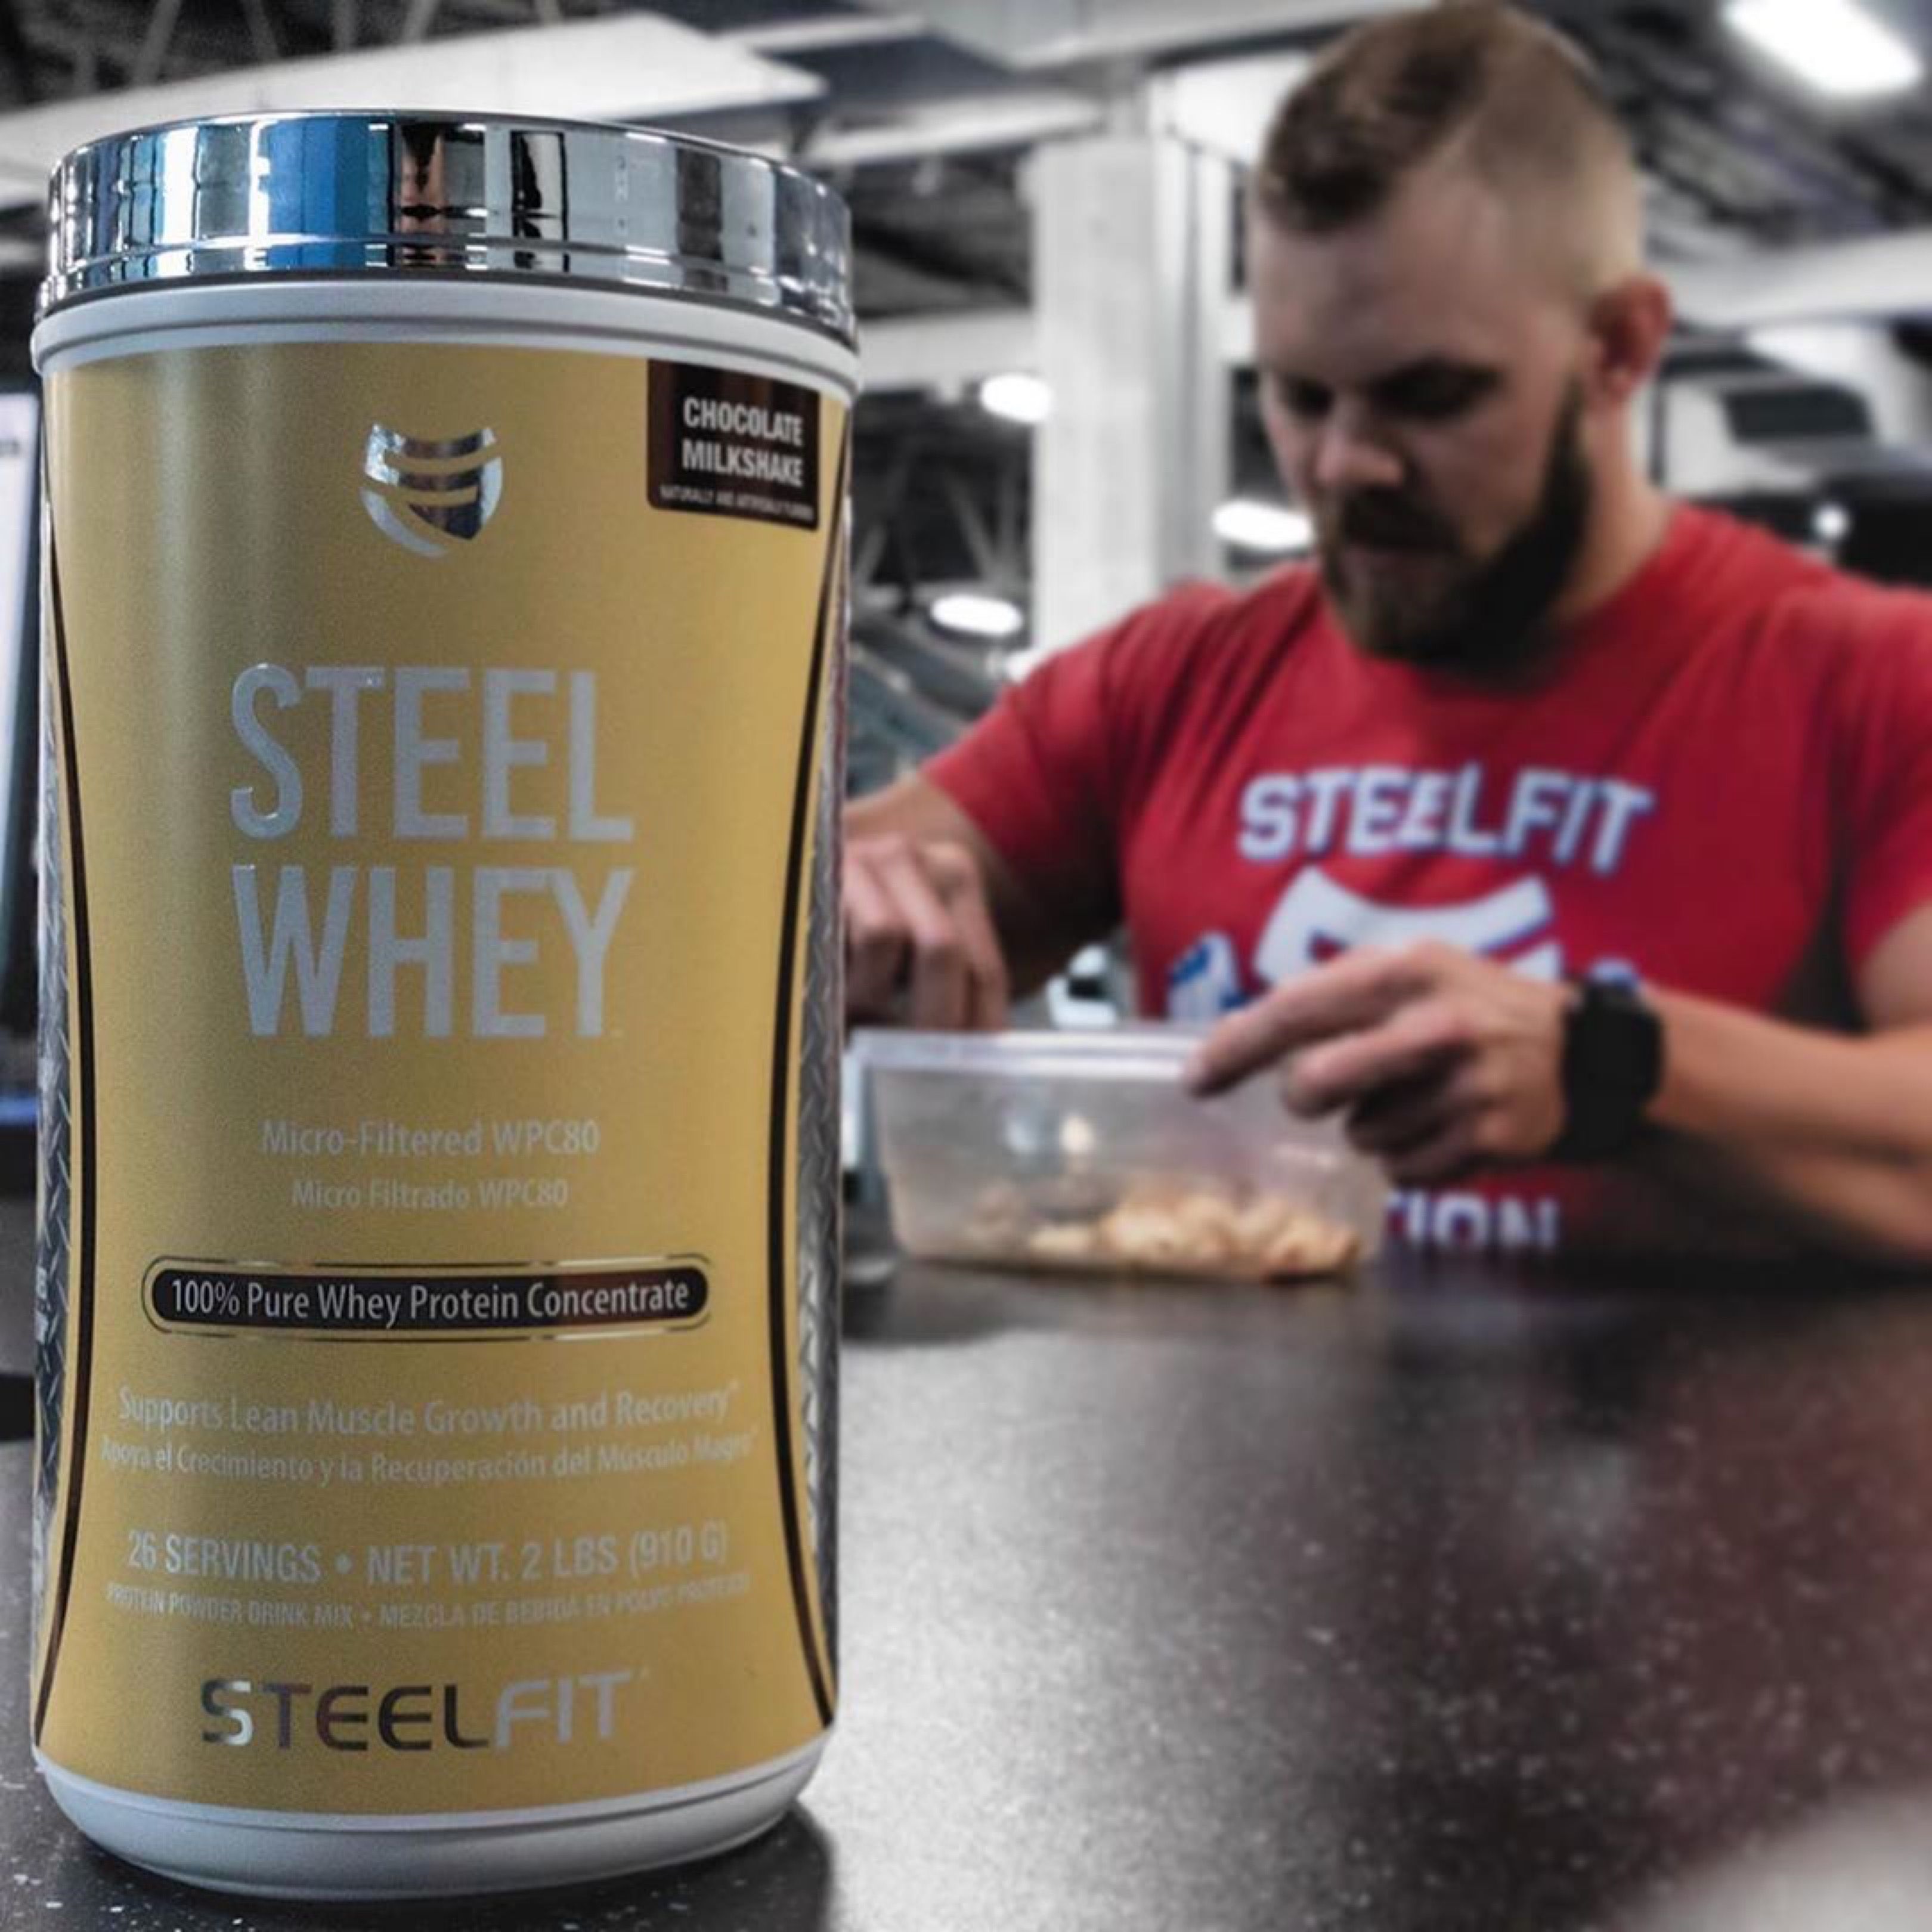 Steel Whey®️ 100 Pure Whey Protein Concentrate Wpc80 Npc News Online 1033